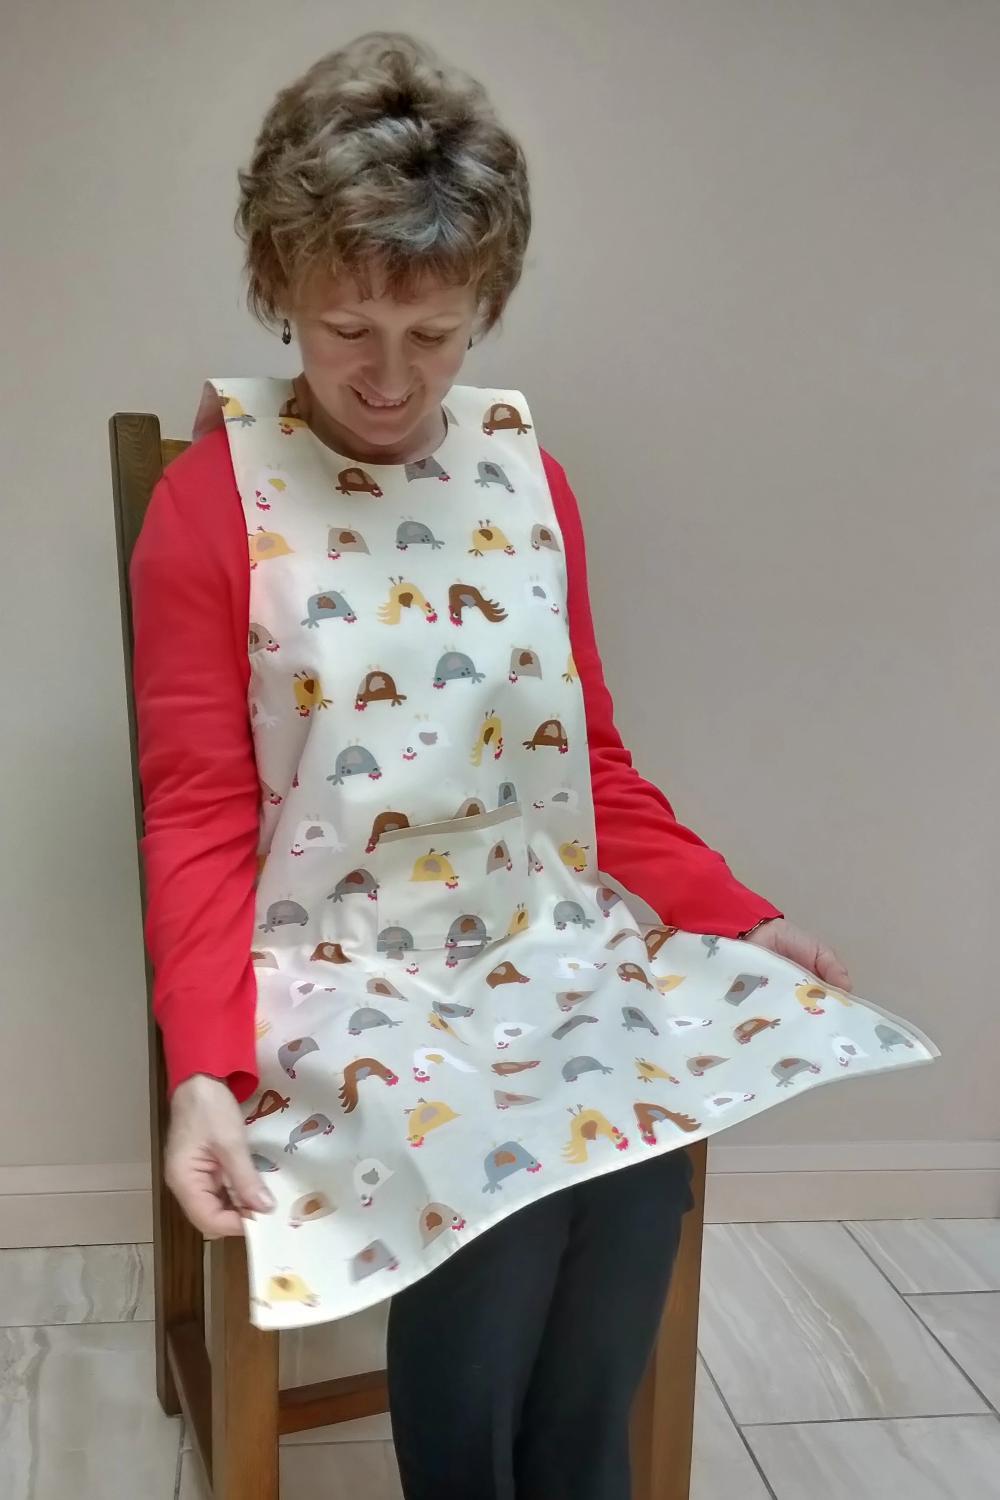 Dining drApron® in chickens pattern Cream background wiht chickens & roosters in yellow, brown, grey & red. Clothing protector that looks like an apron so no stigma of an adult bib